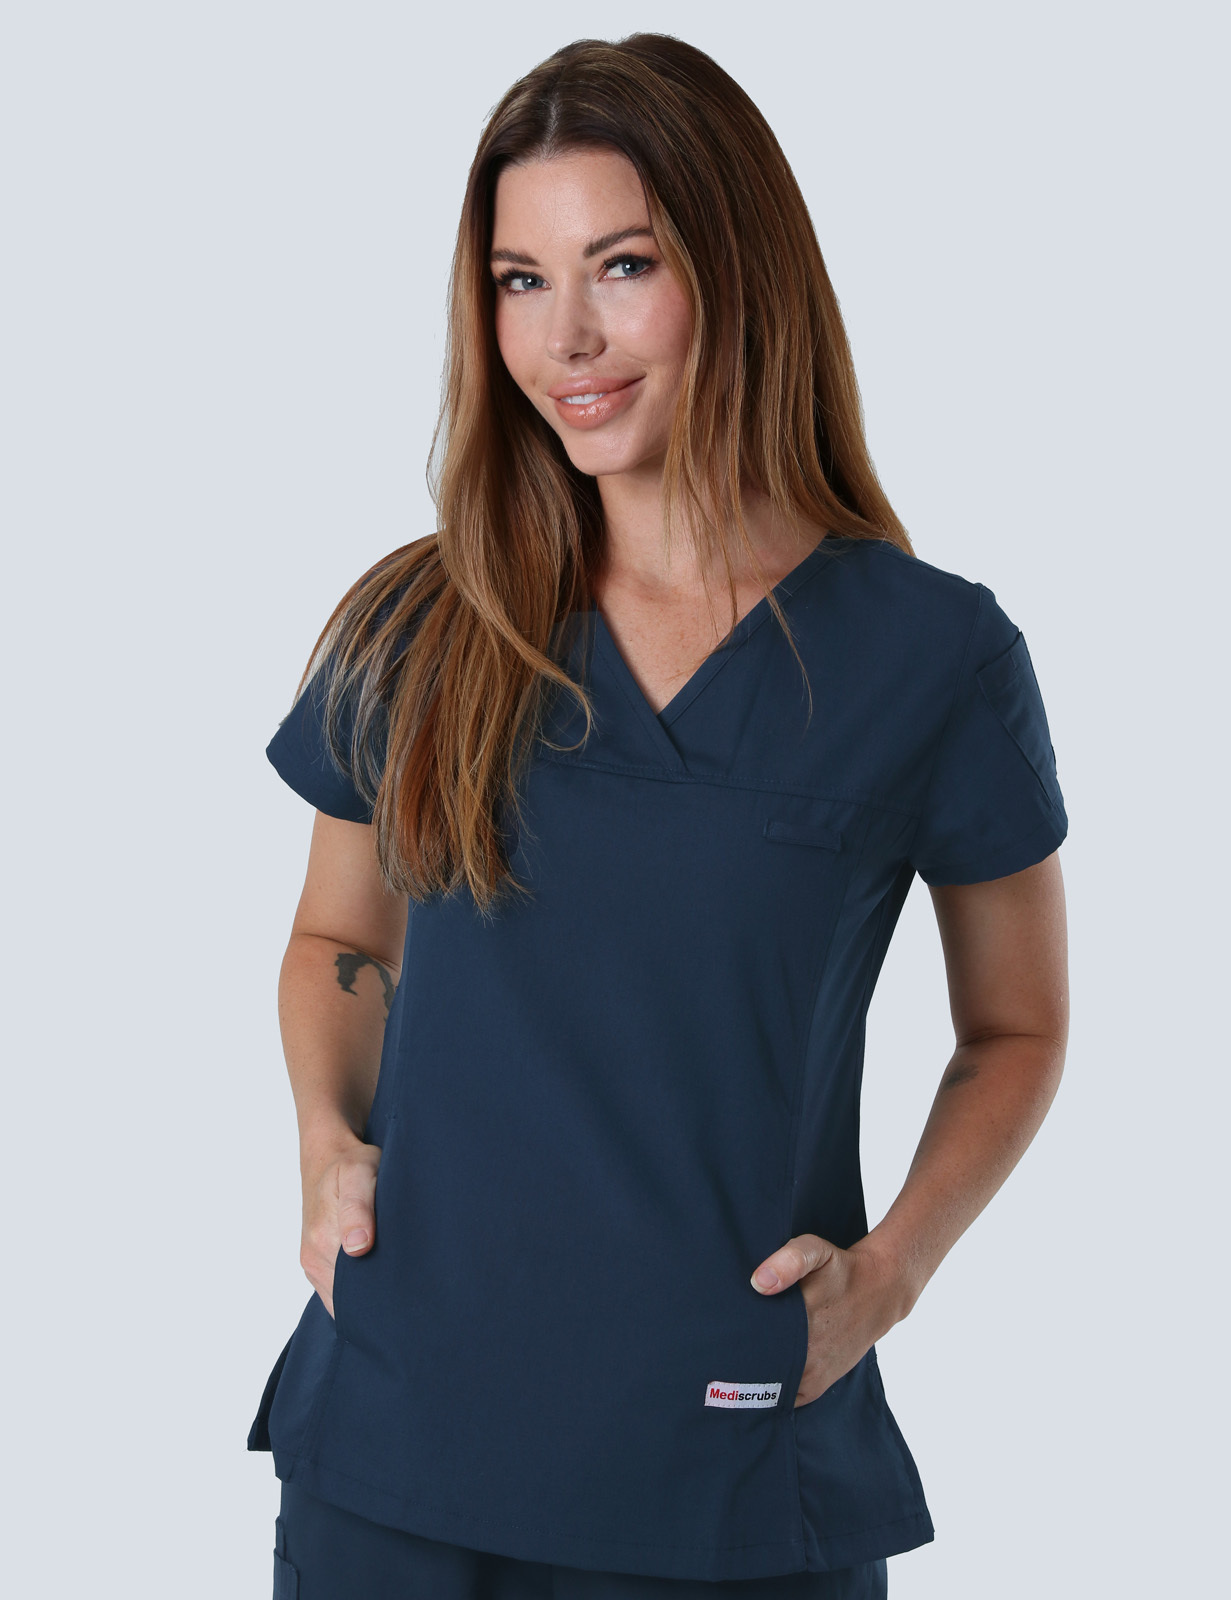 Prince Charles Hospital Cardiac Scientist Unit Uniform Set Bundle  (Women's Fit Solid Top and Cargo Pants in Navy + Logo) 